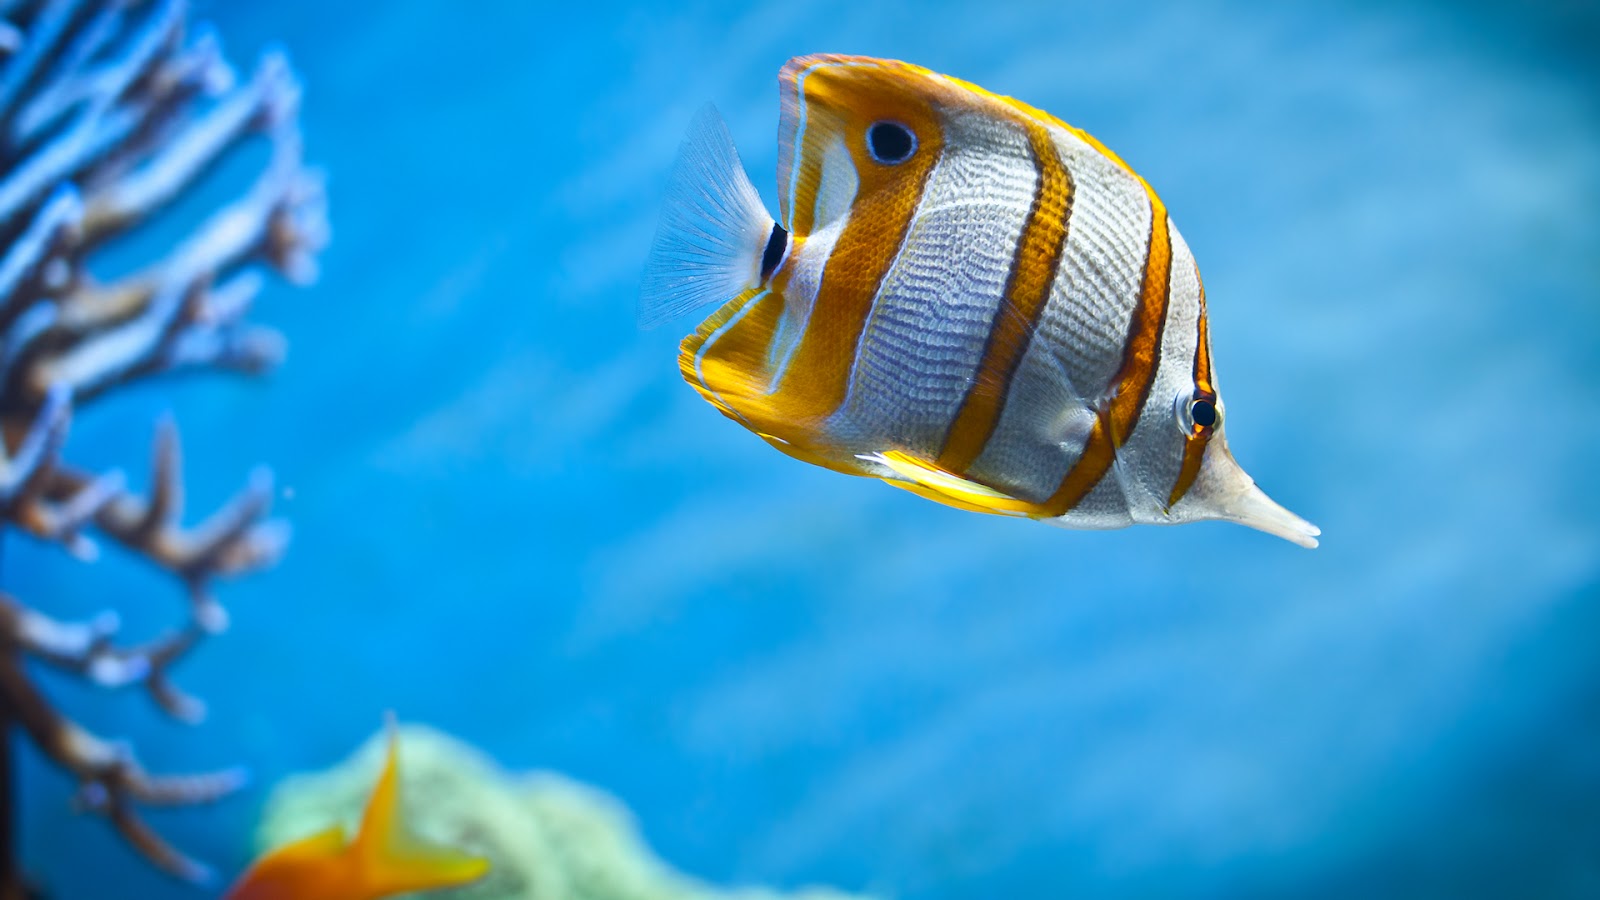 Fish 4k ultra hd 16:10 wallpapers hd, desktop backgrounds 3840x2400, images  and pictures